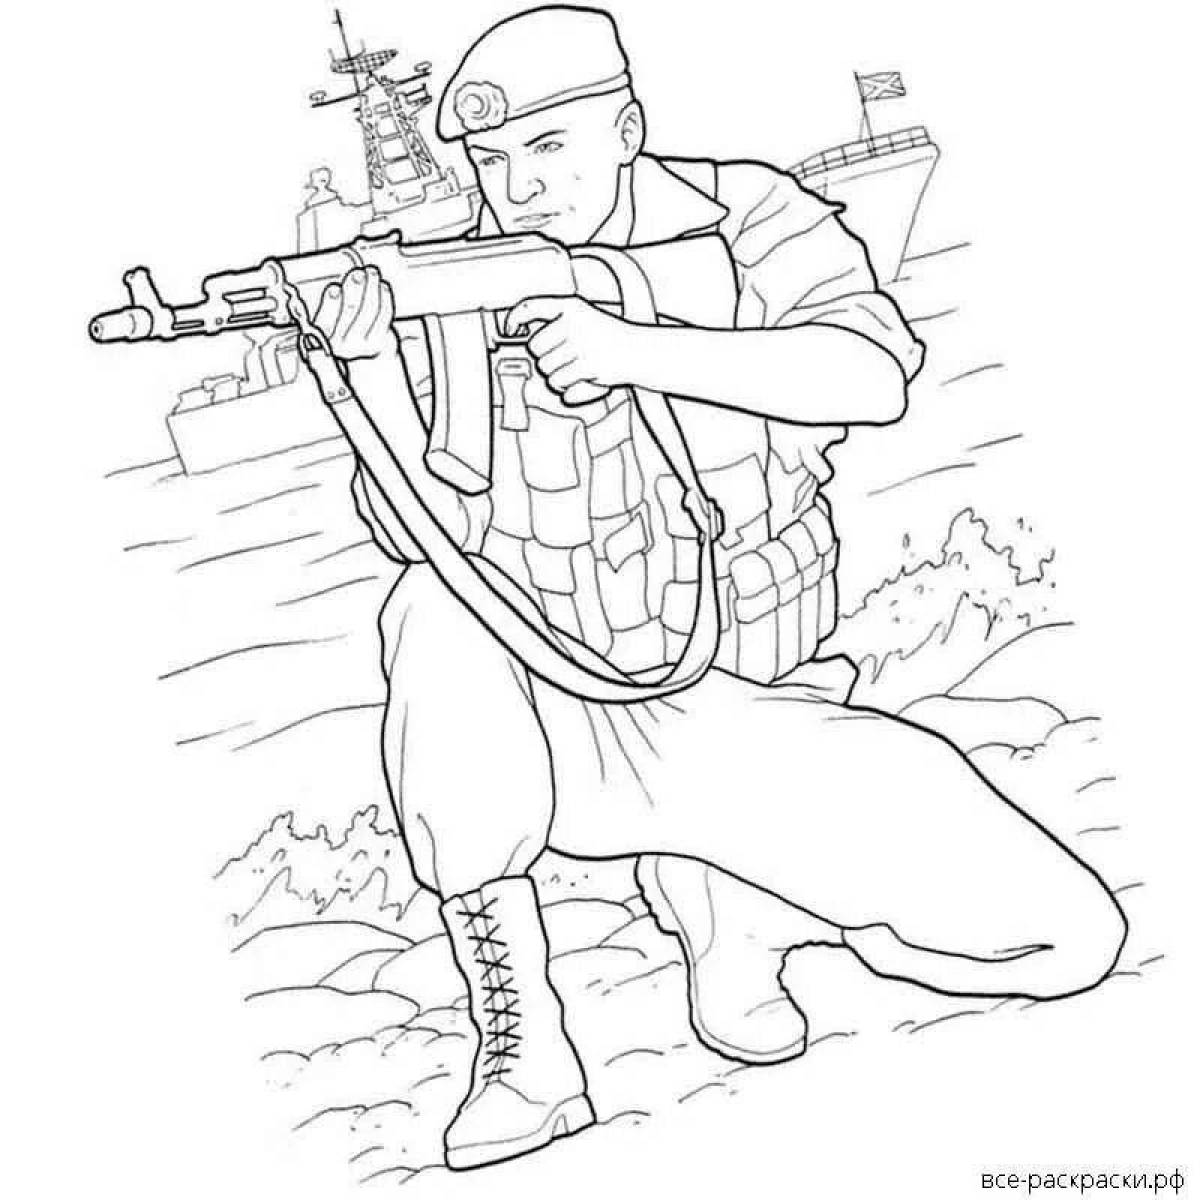 Fearless soldier coloring with a machine gun